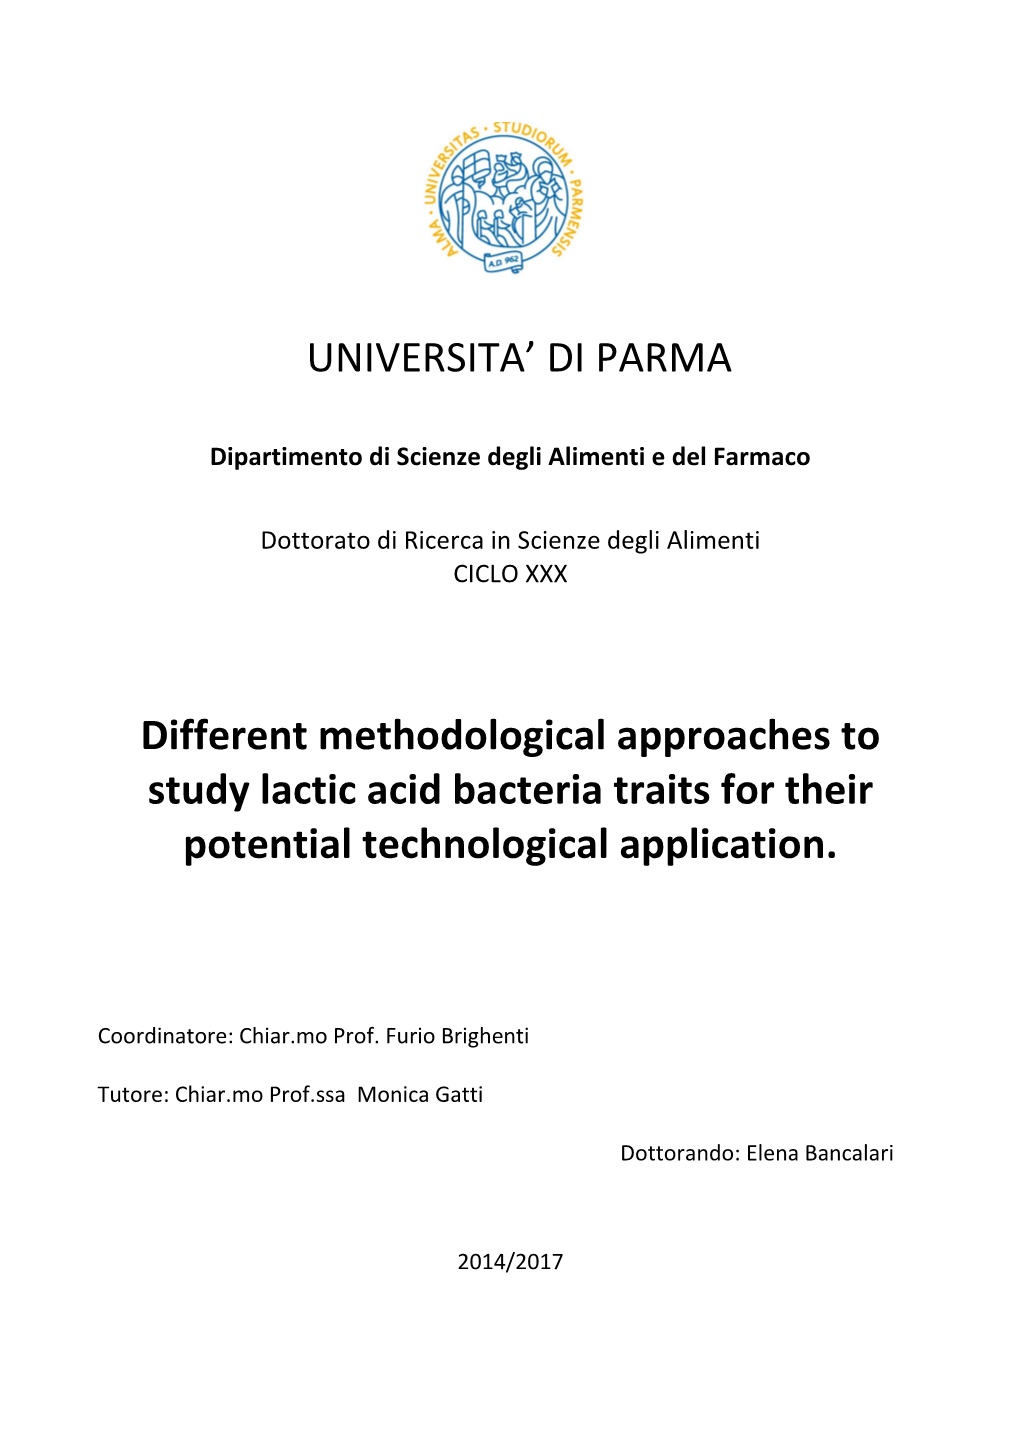 UNIVERSITA' DI PARMA Different Methodological Approaches To